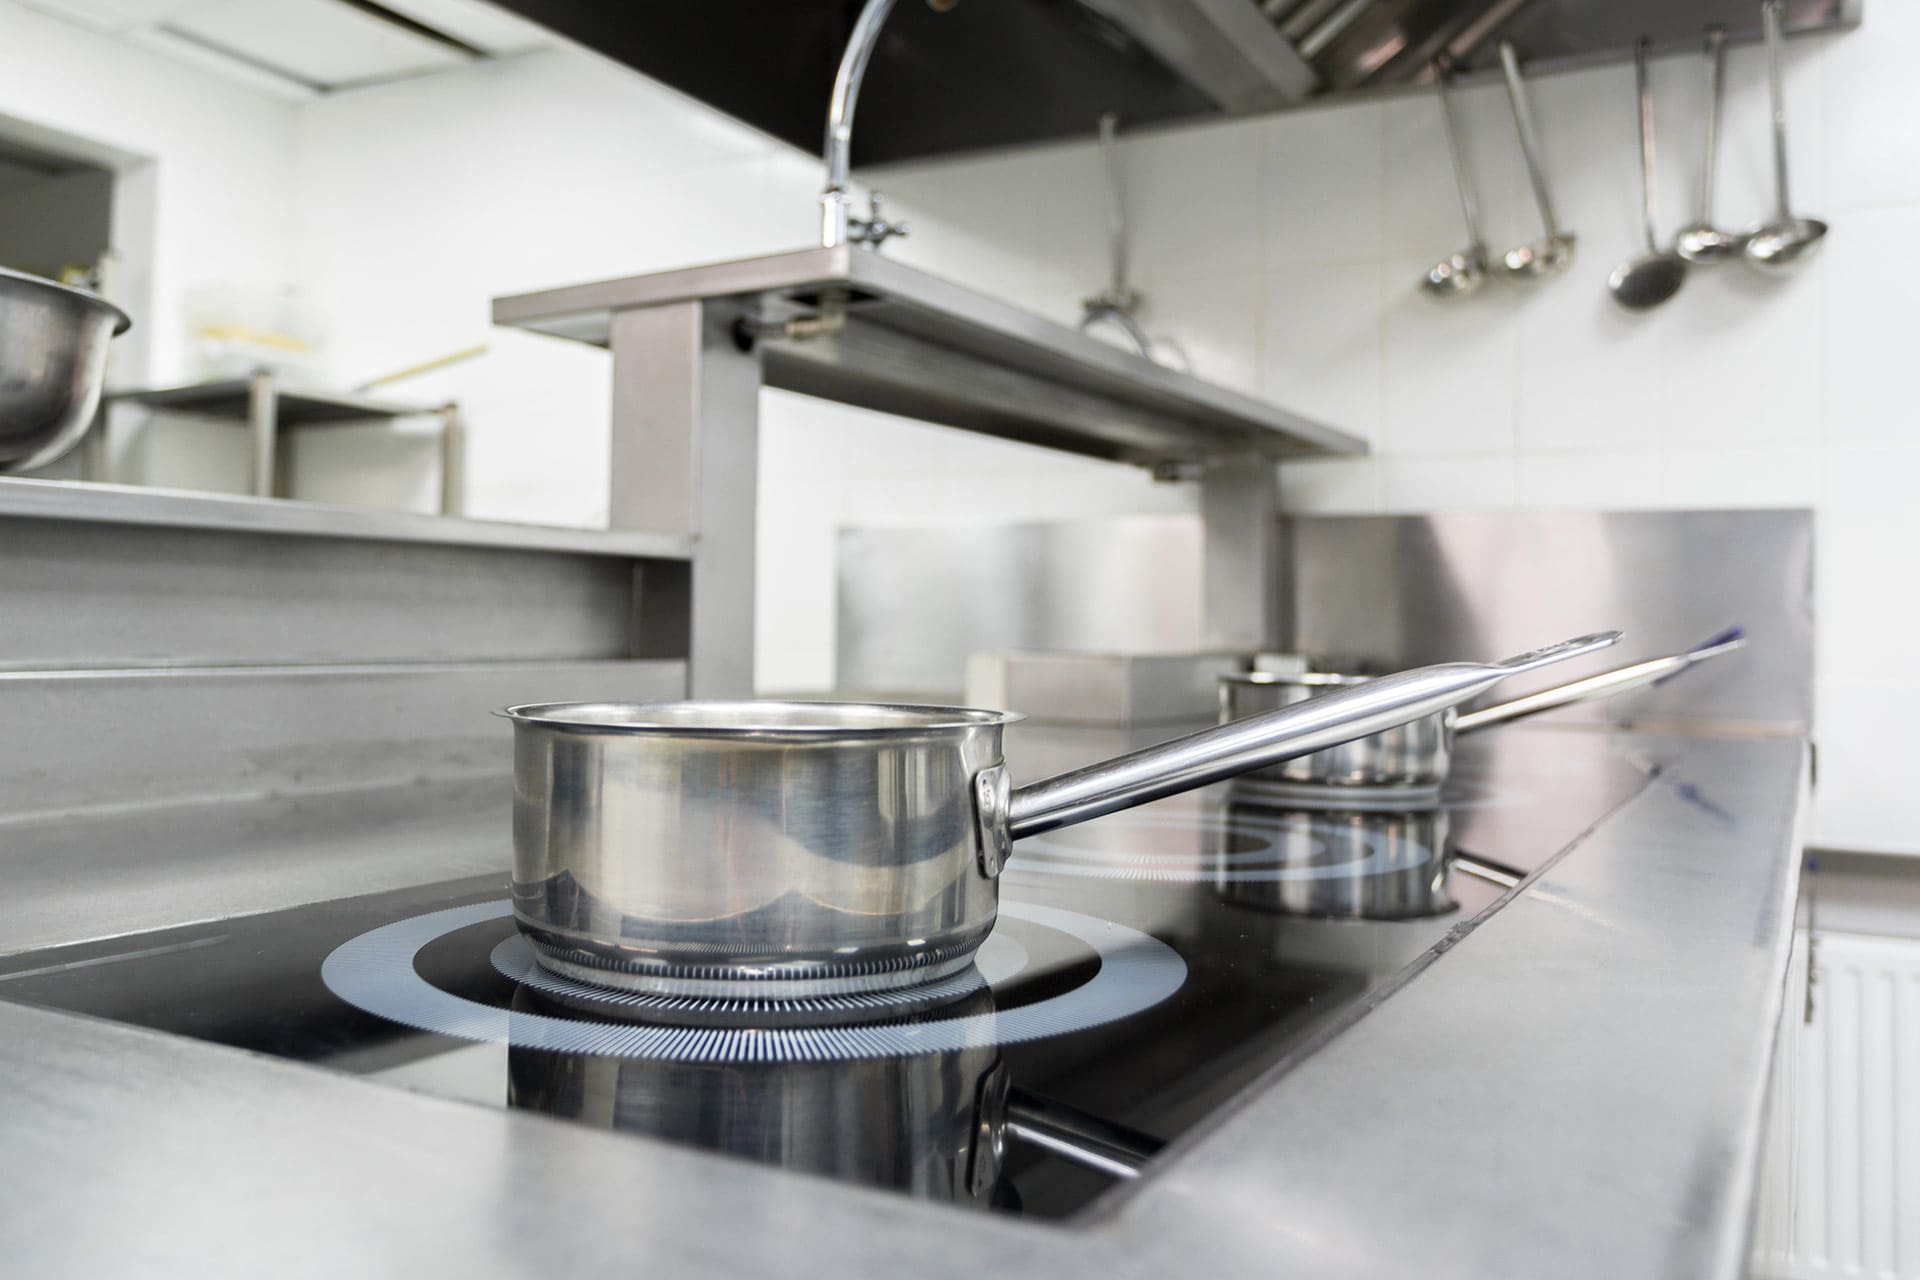 Advantages of stainless steel